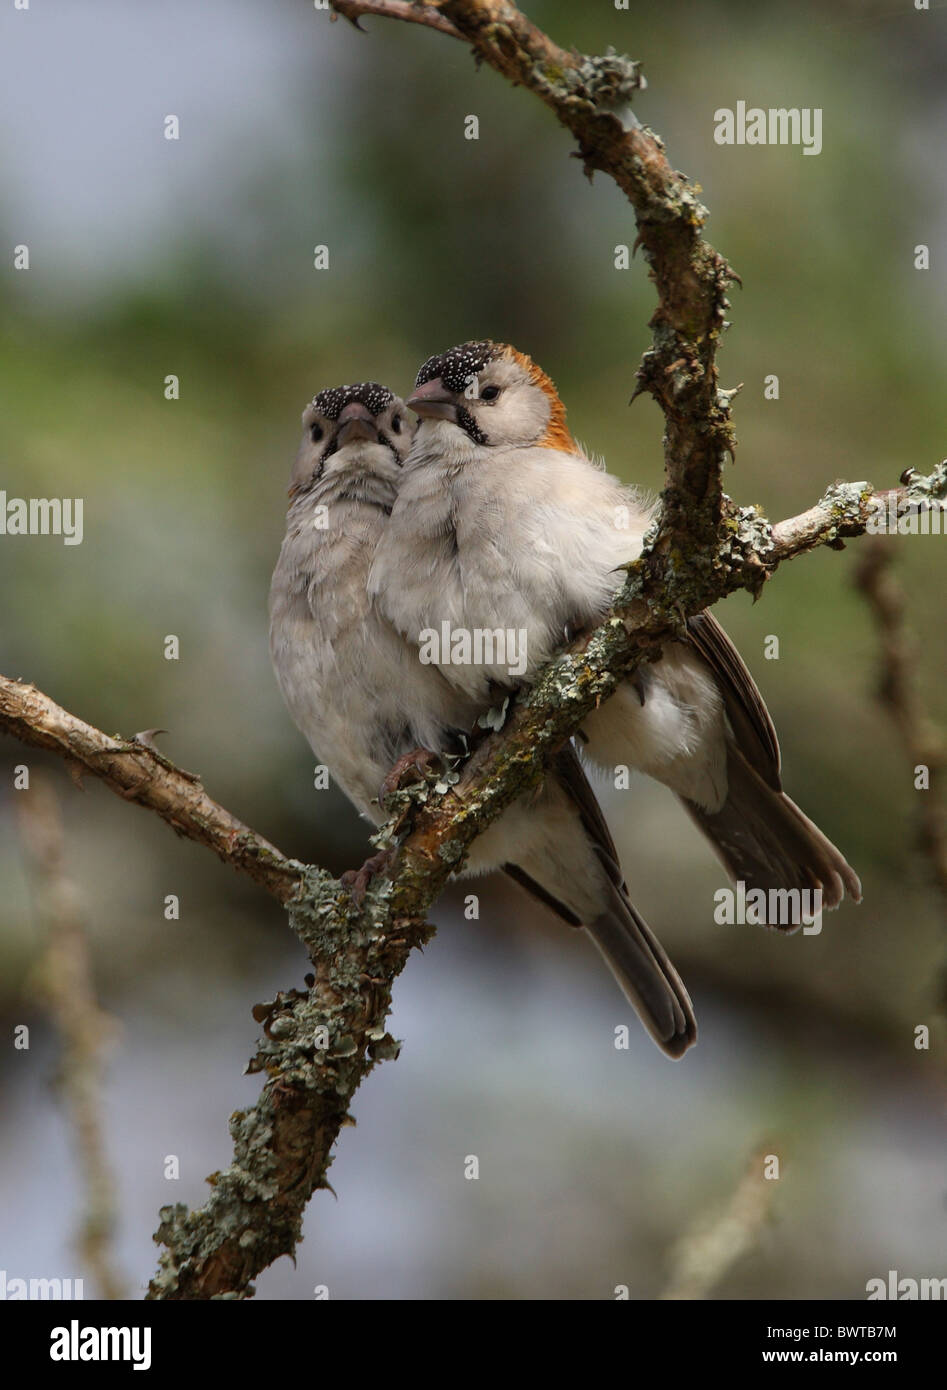 Speckle-fronted Weaver (Sporopipes frontalis emini) adult pair, perched together on branch, Kenya, november Stock Photo